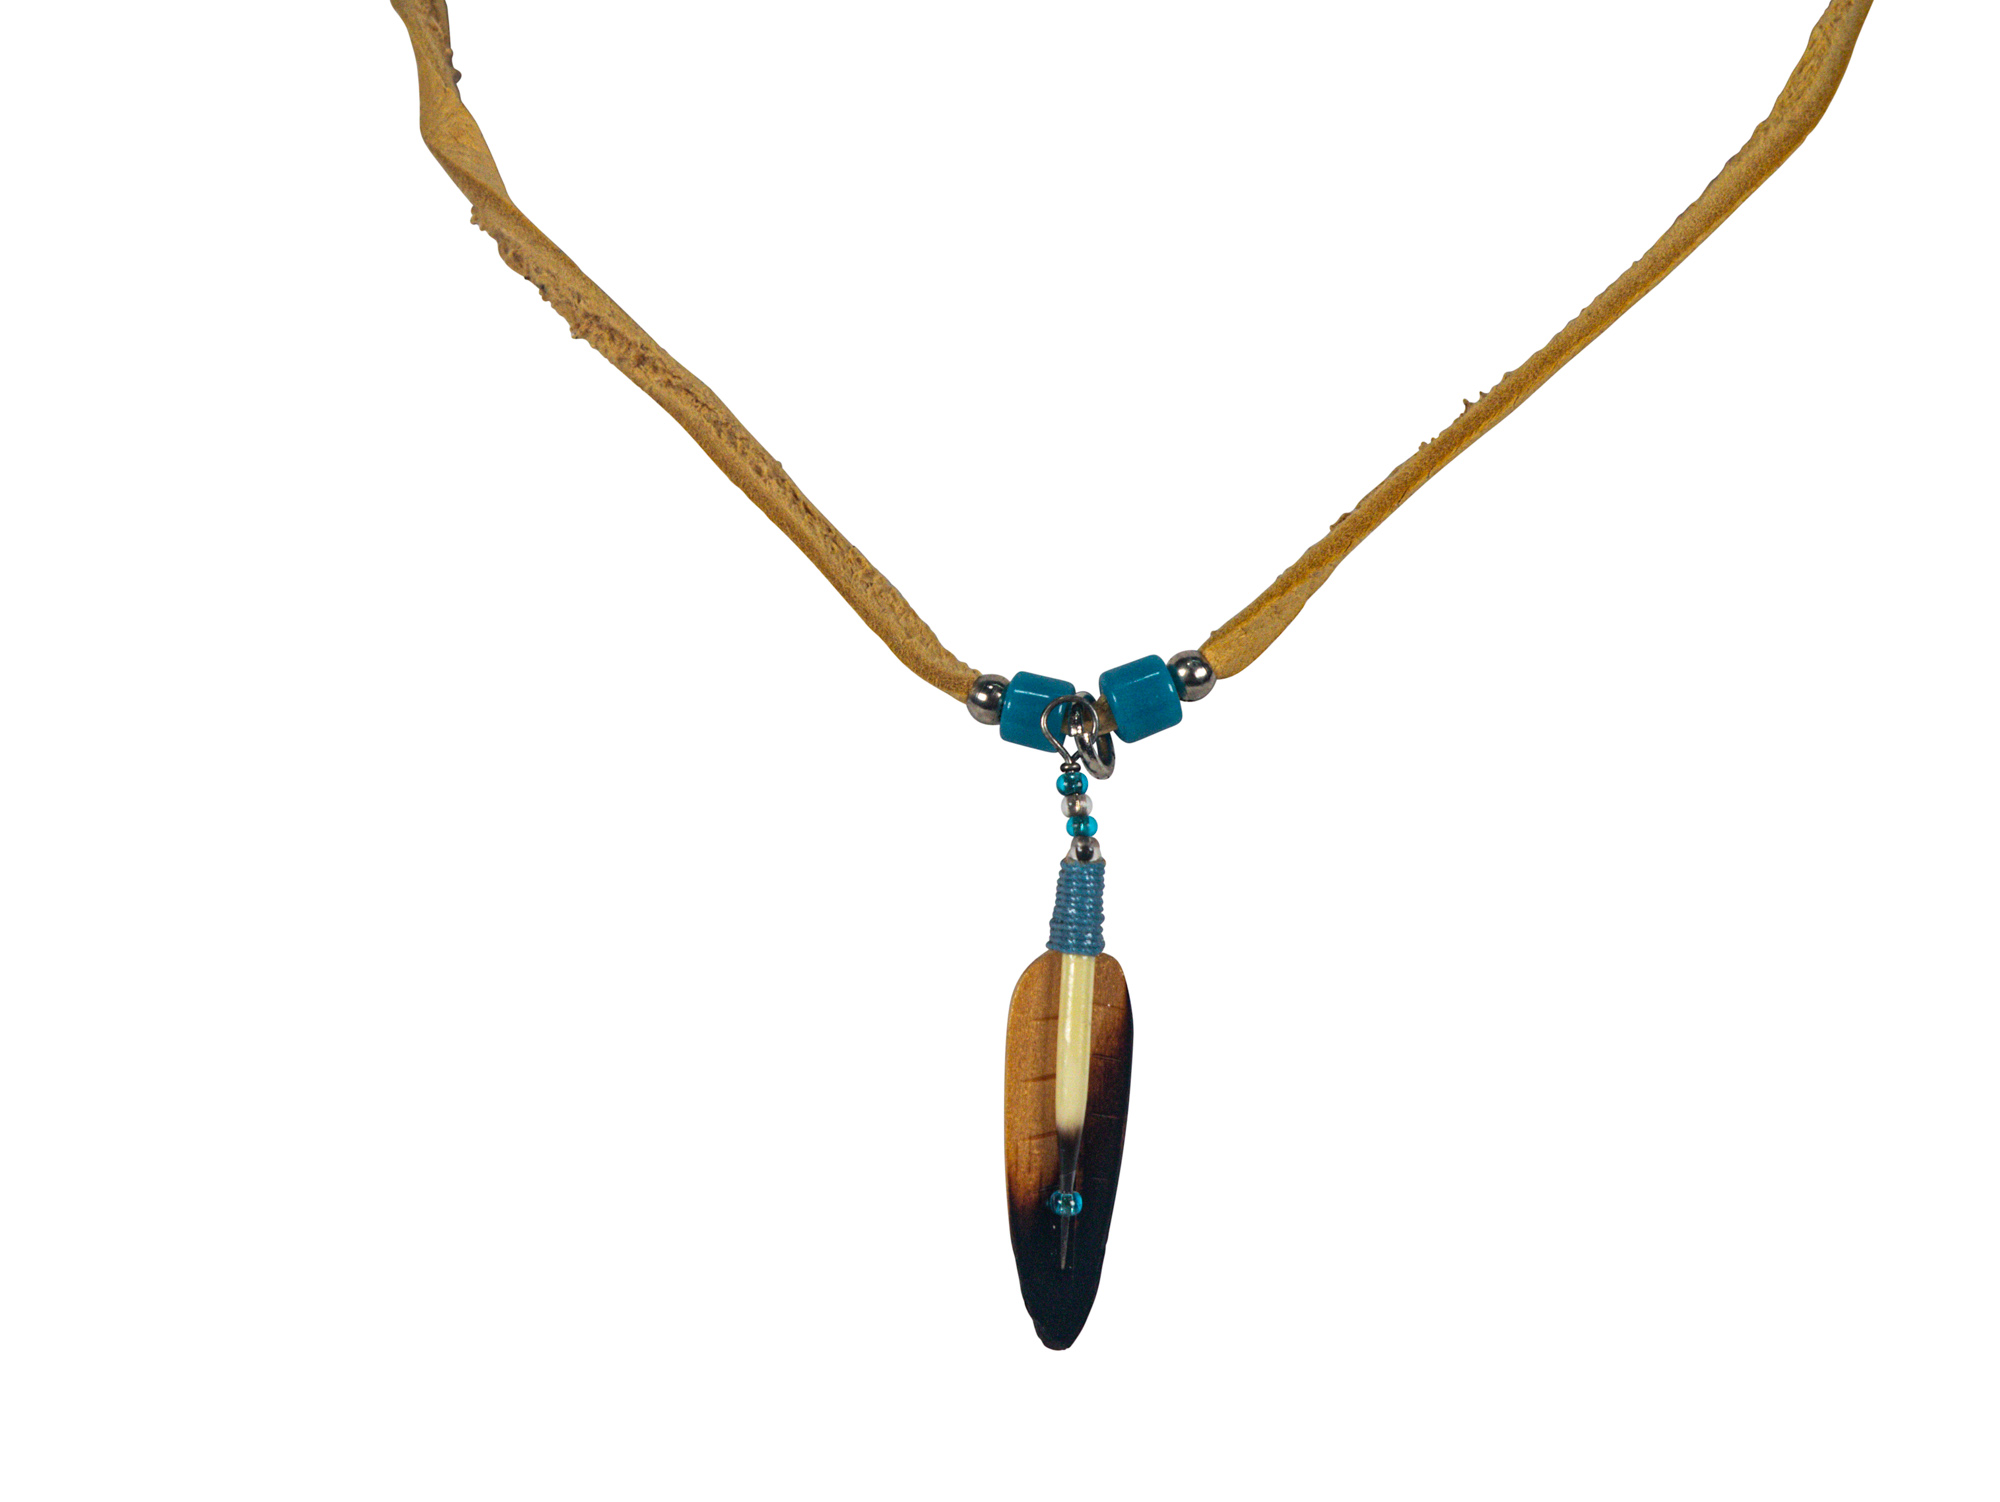 Ojibwa Wood Feather Quill Necklace: Gallery Item 